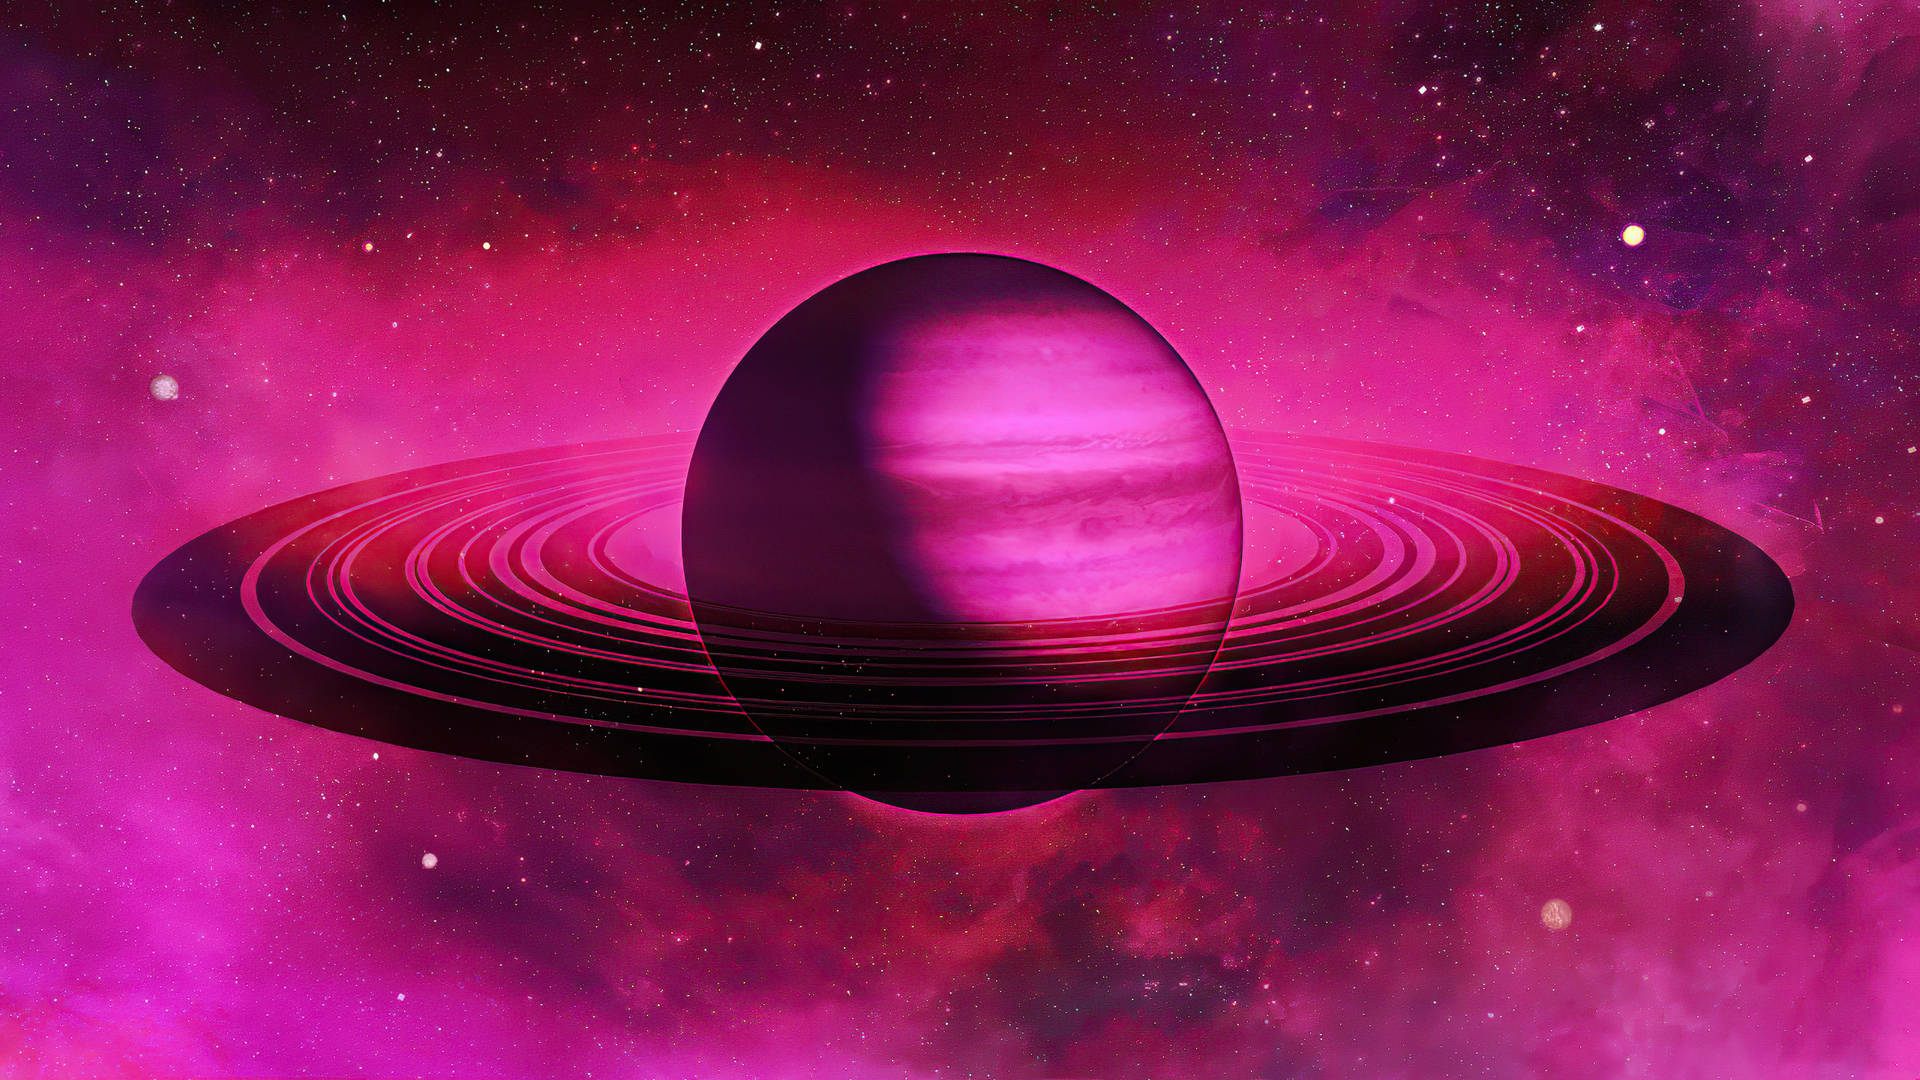 1920x1080 Hd Giant Pink Planet